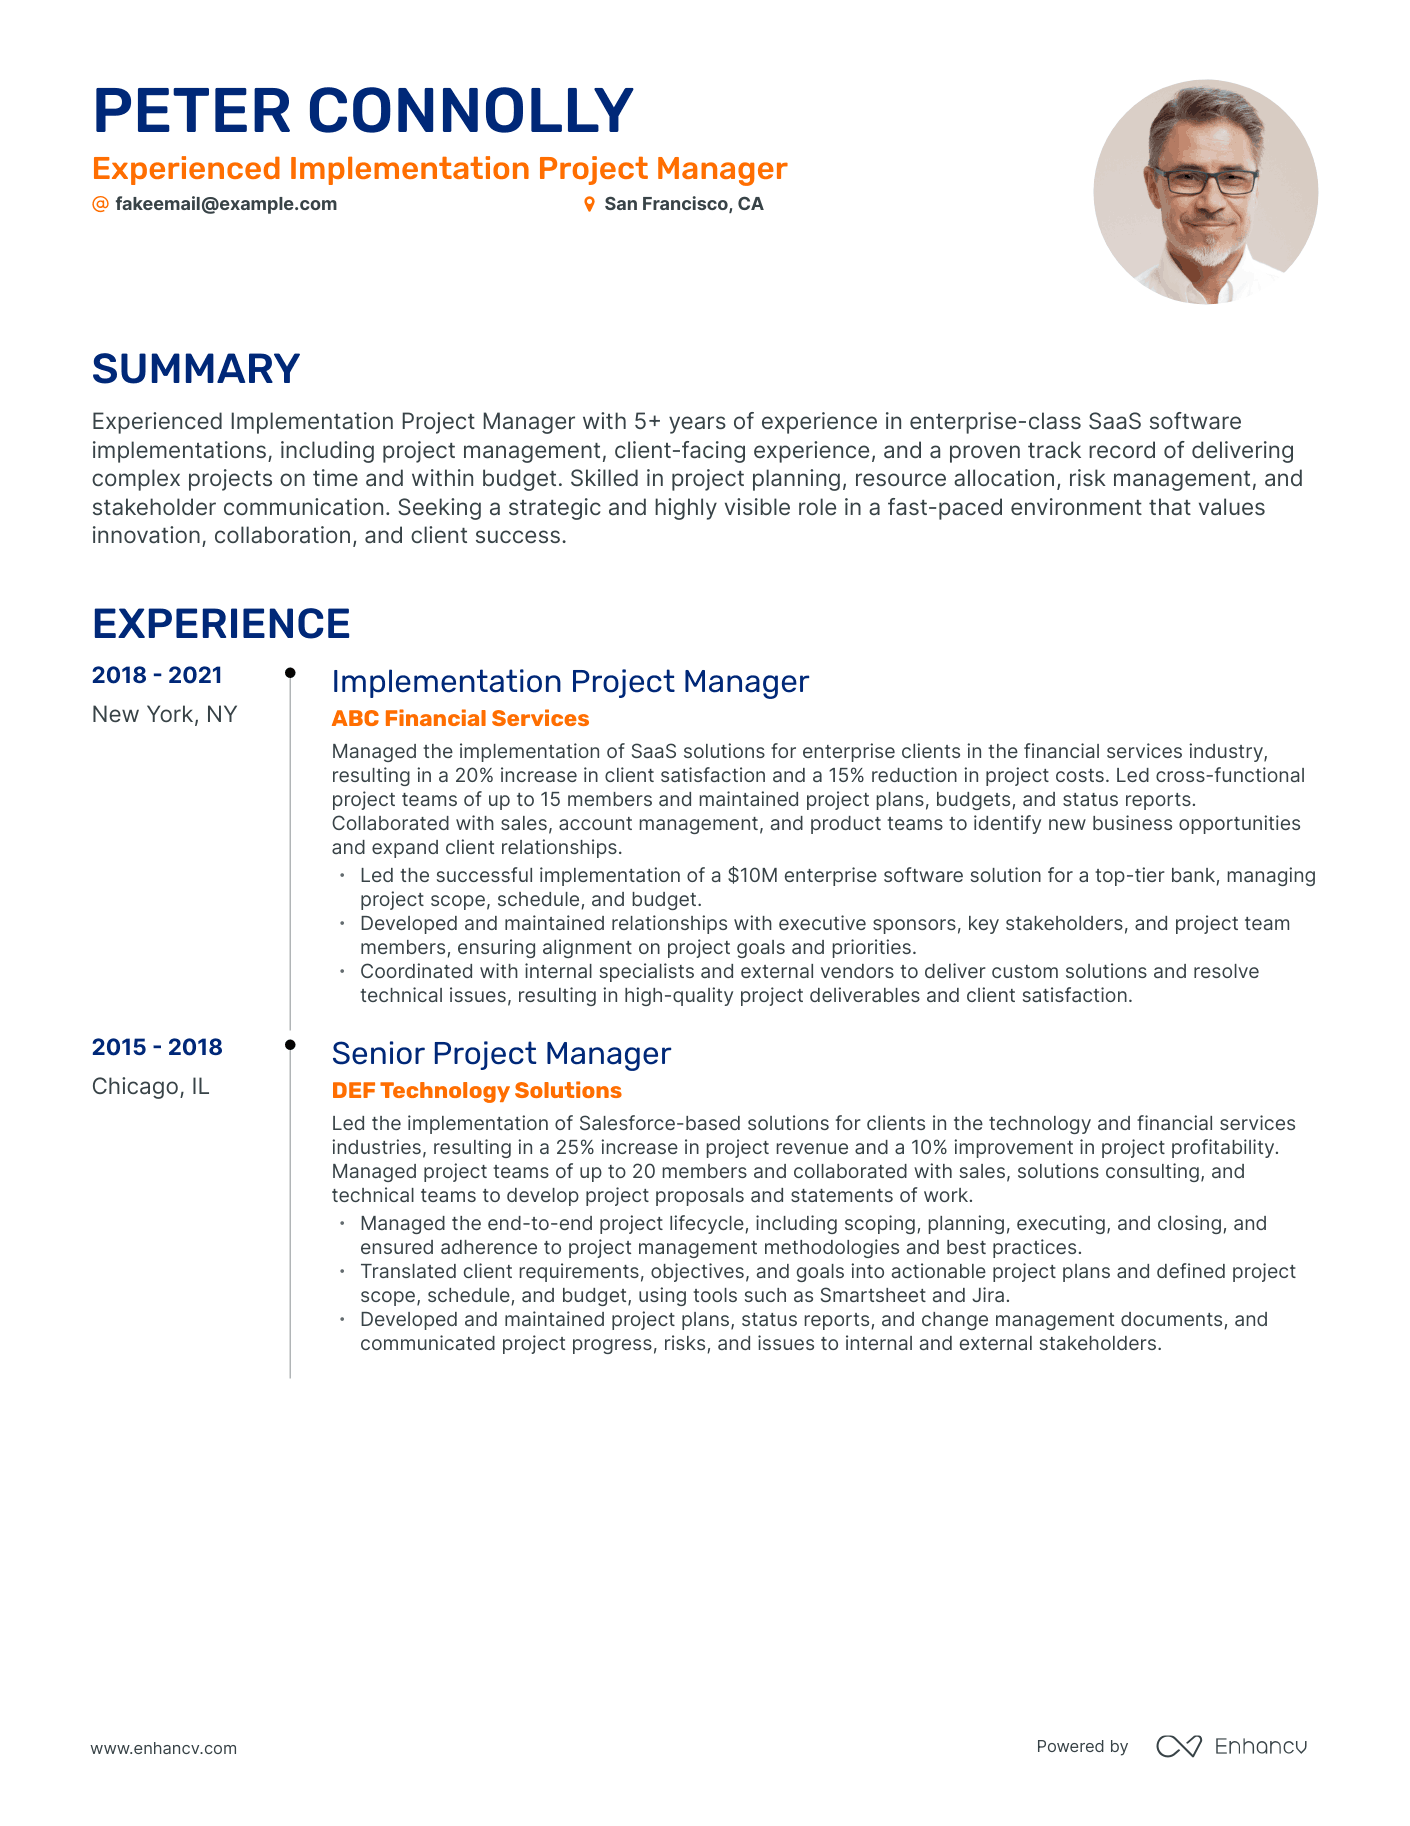 Timeline Implementation Project Manager Resume Template